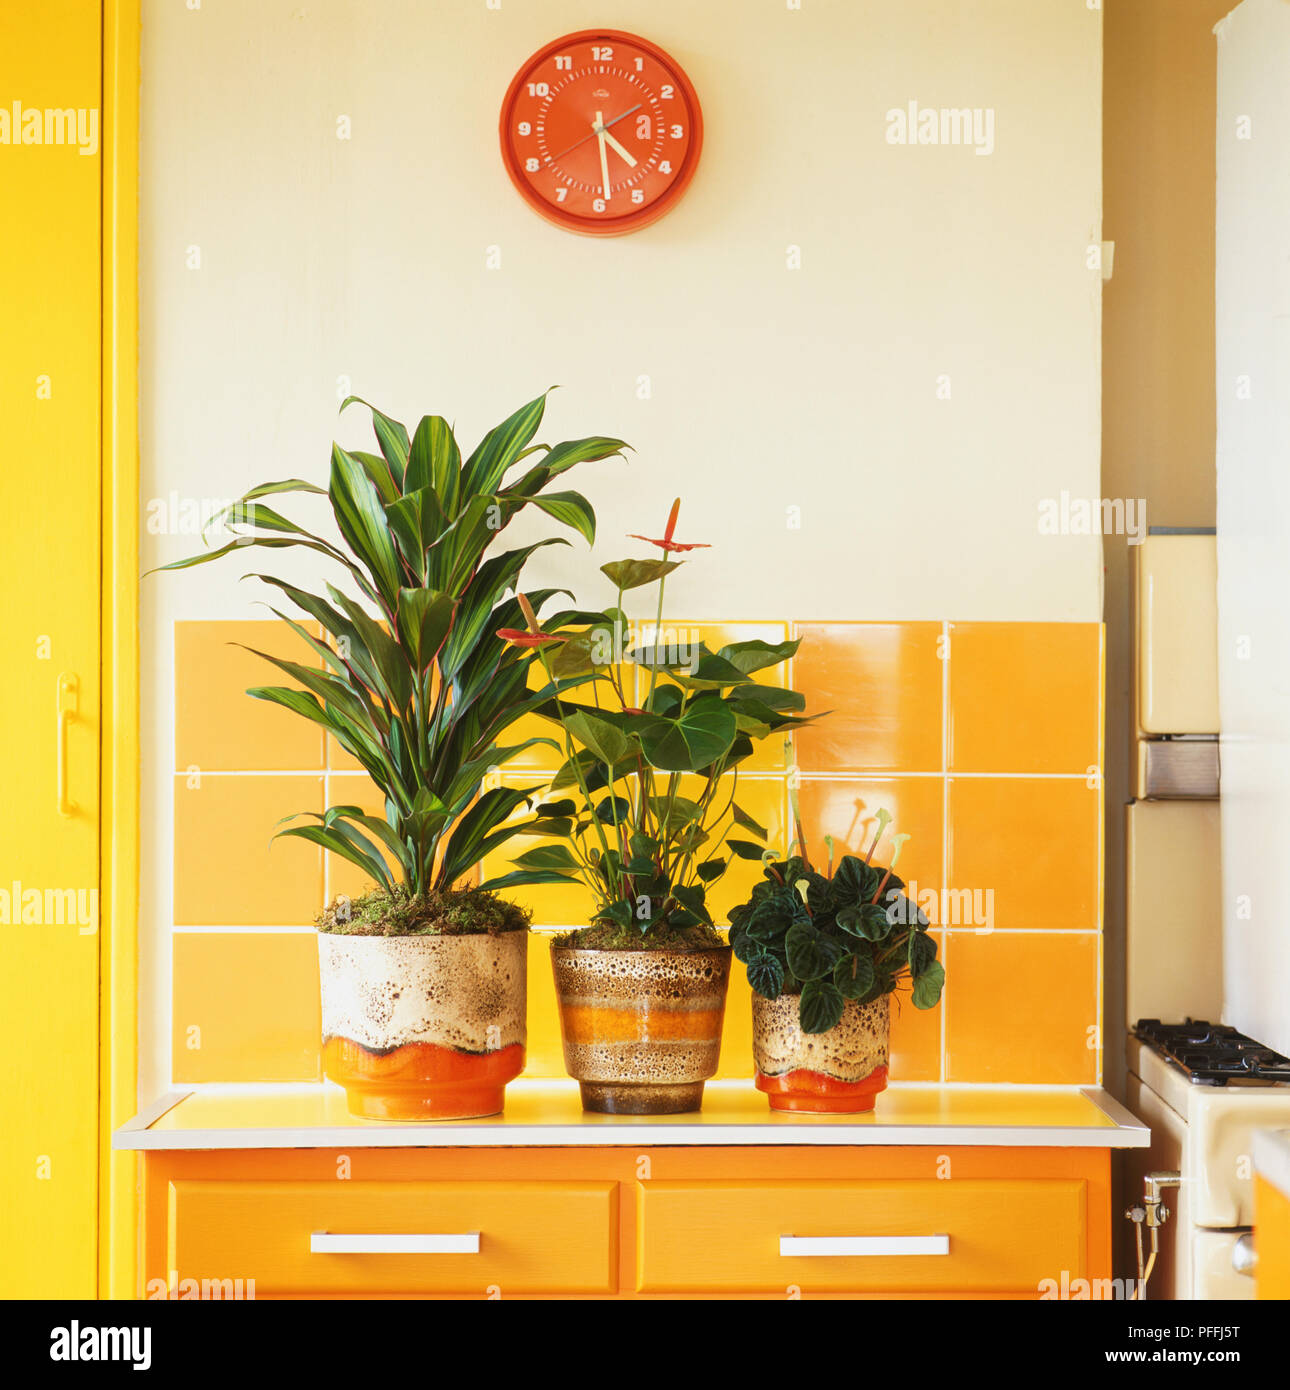 Funky 1970s glazed pots are ideal for plants such as these with glossy leaves, displayed in a kitchen setting, set against glazed tiles and with a clock on the wall. Stock Photo